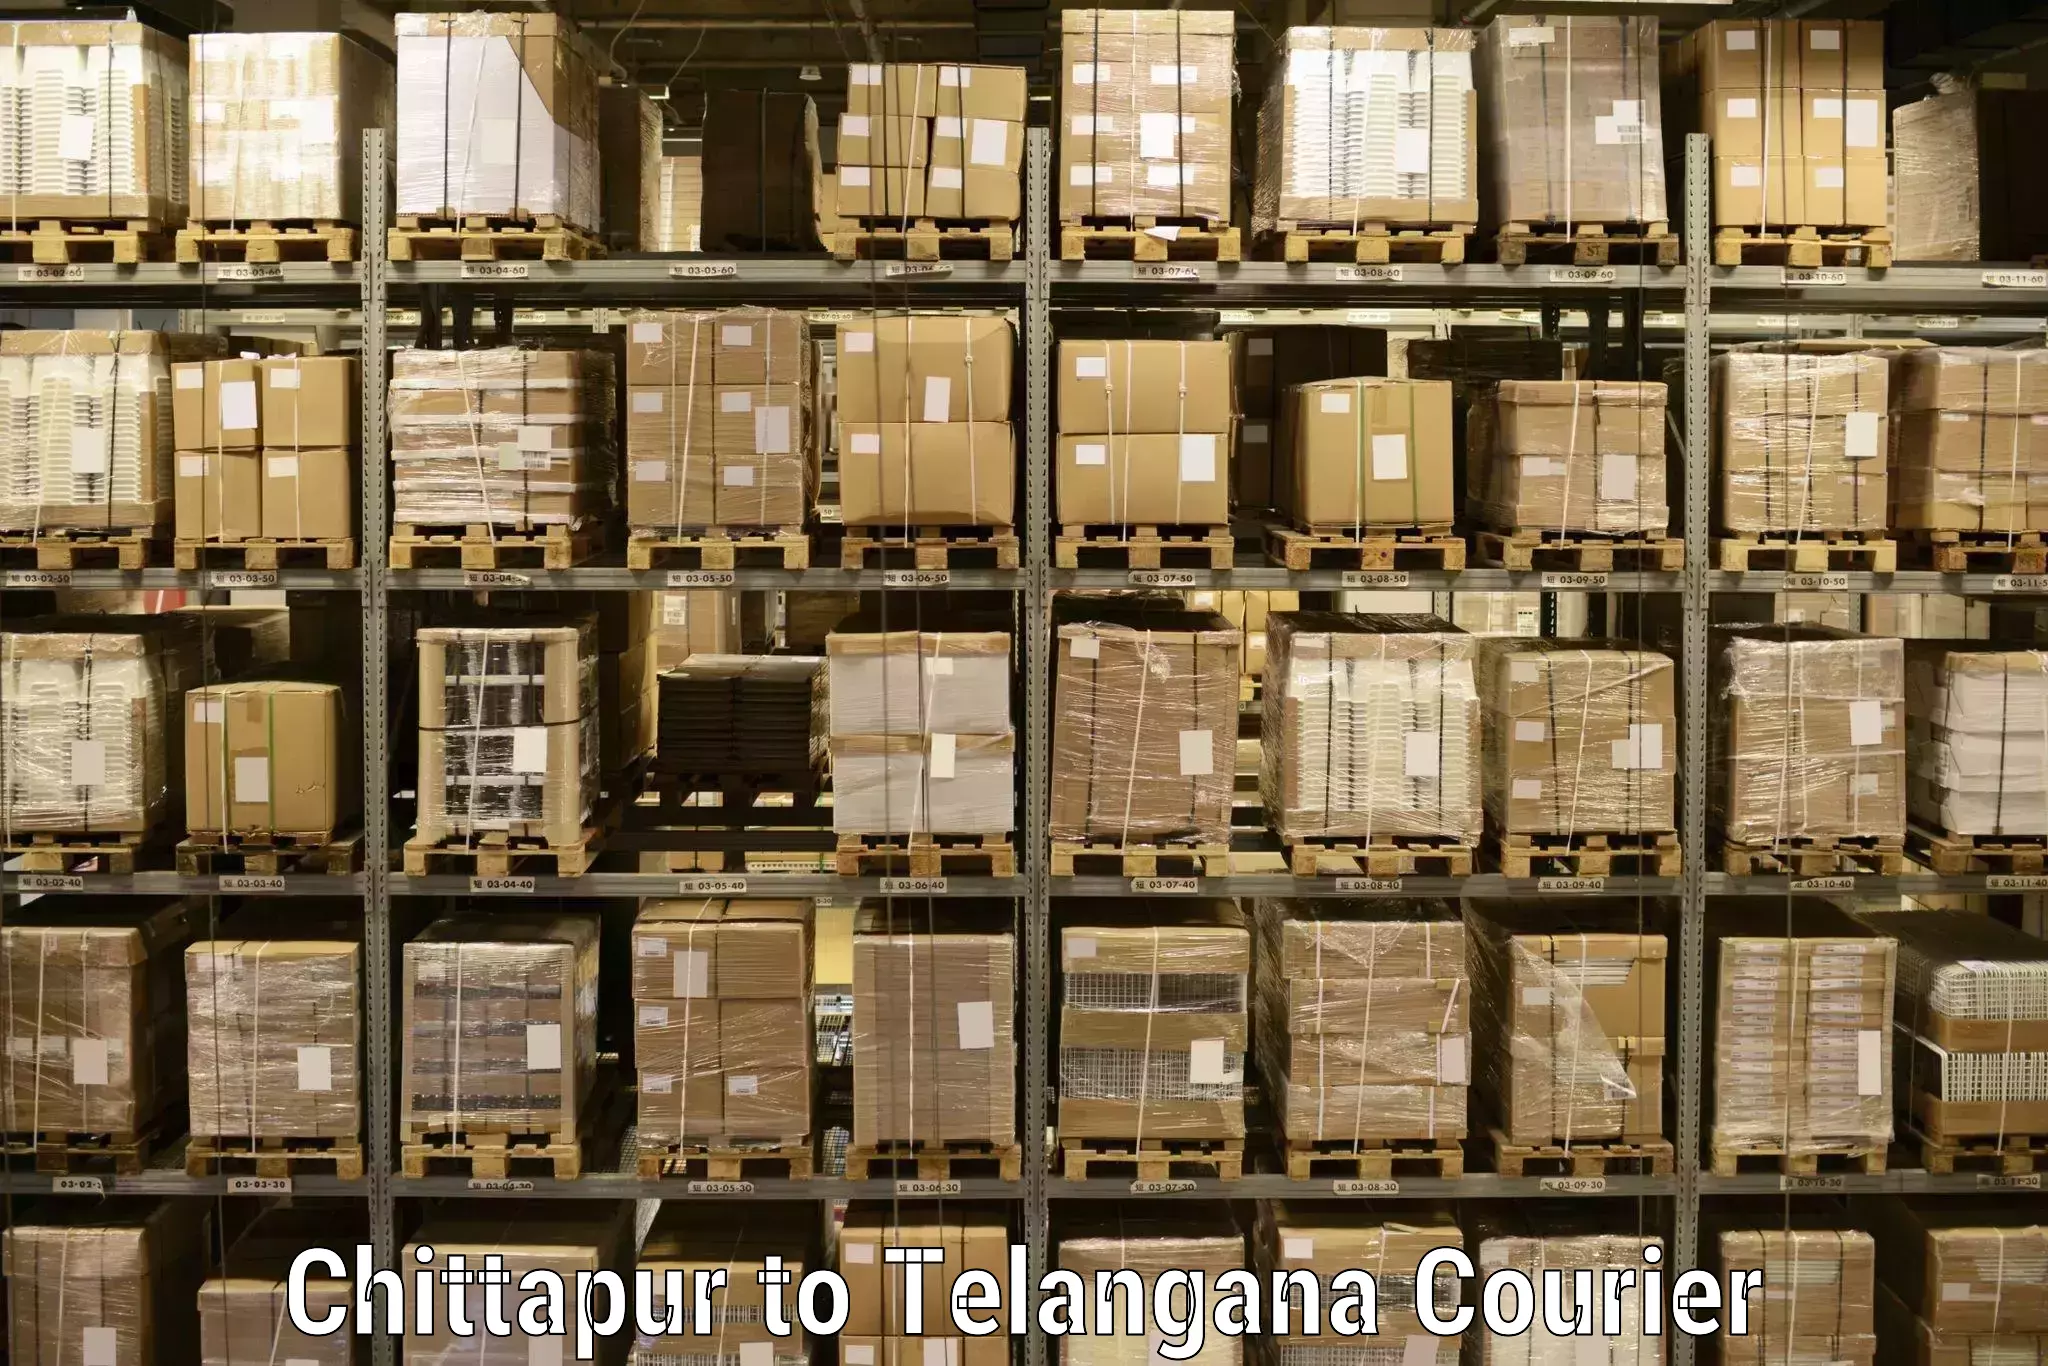 Pharmaceutical courier Chittapur to Warangal